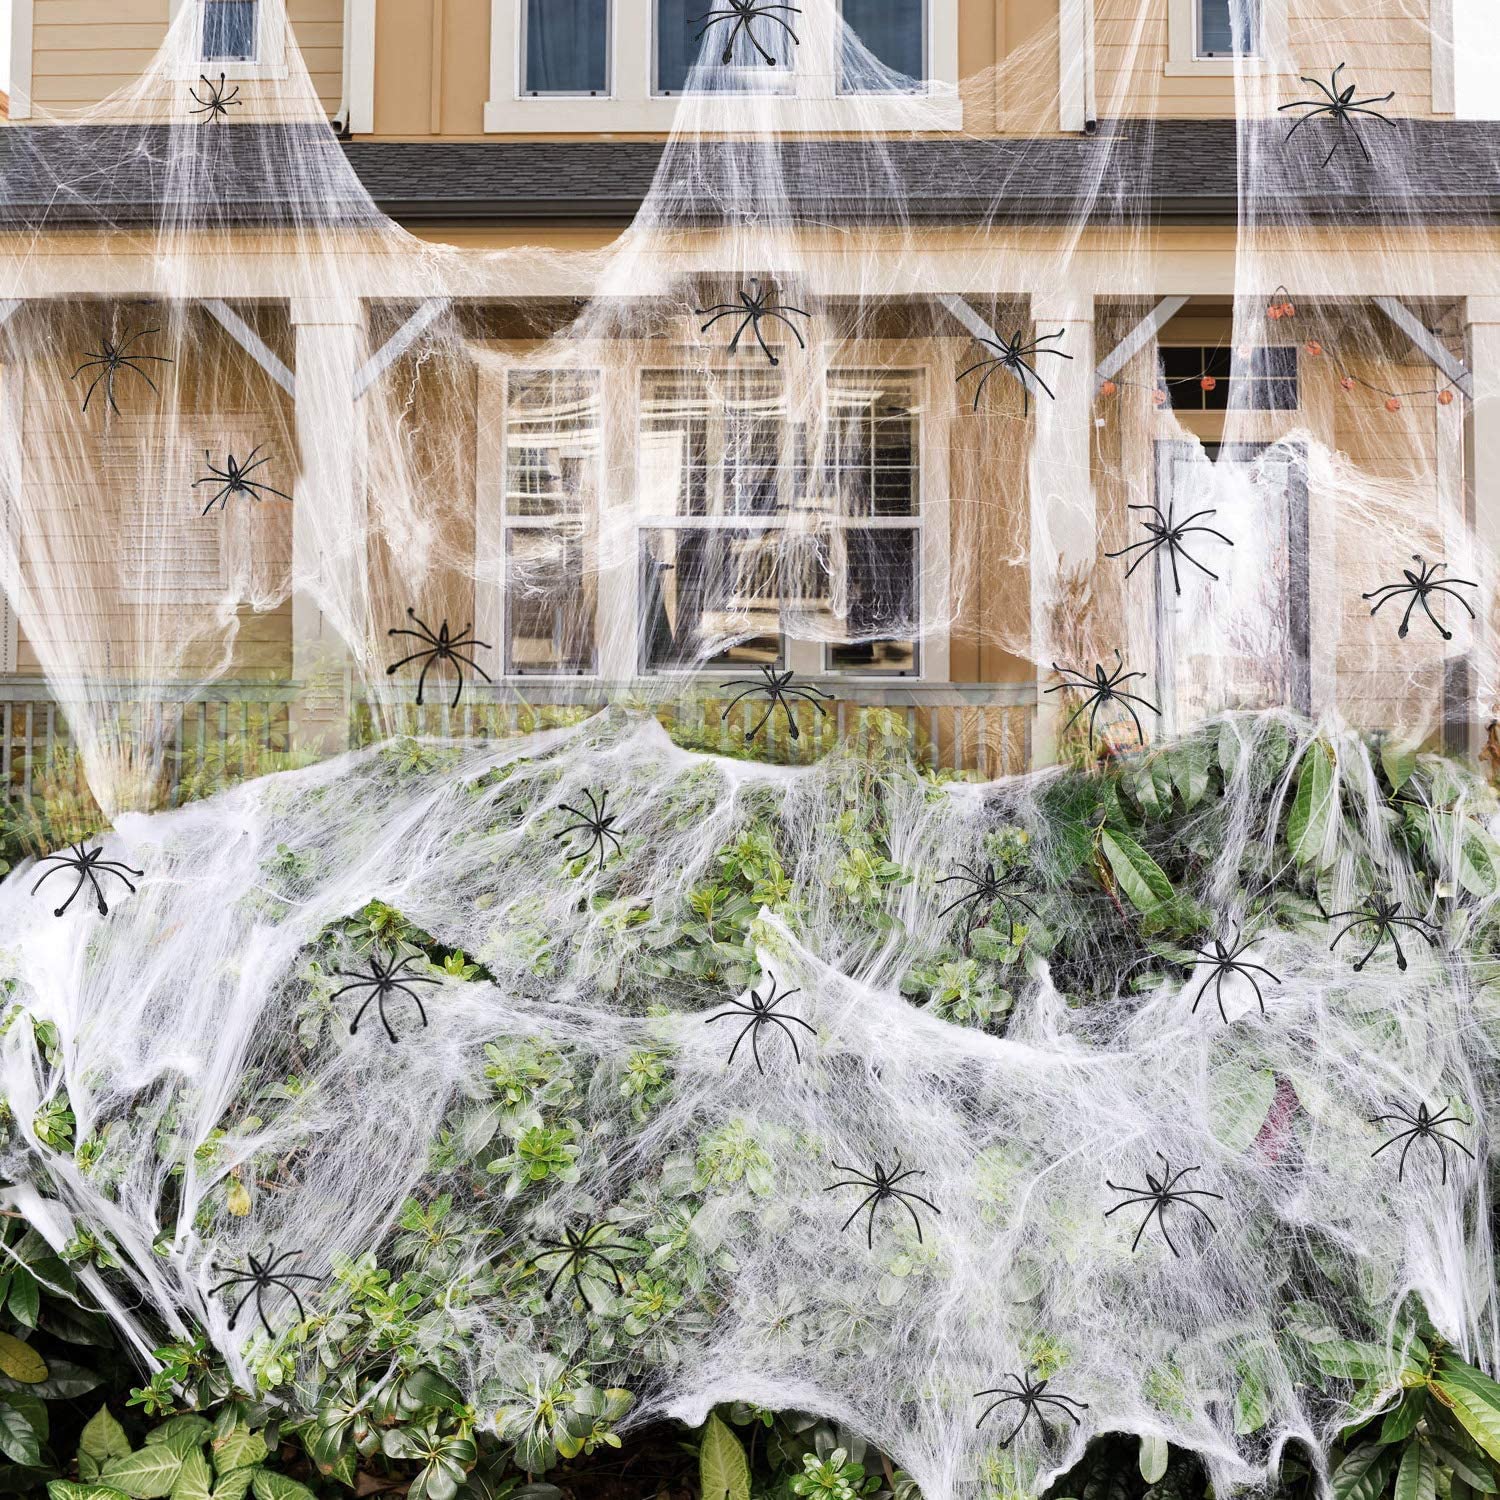 

Artificial Spider Web Halloween Decoration Scary Party Scene Props White Stretchy Cobweb Horror House Home Decora Accessories 20g